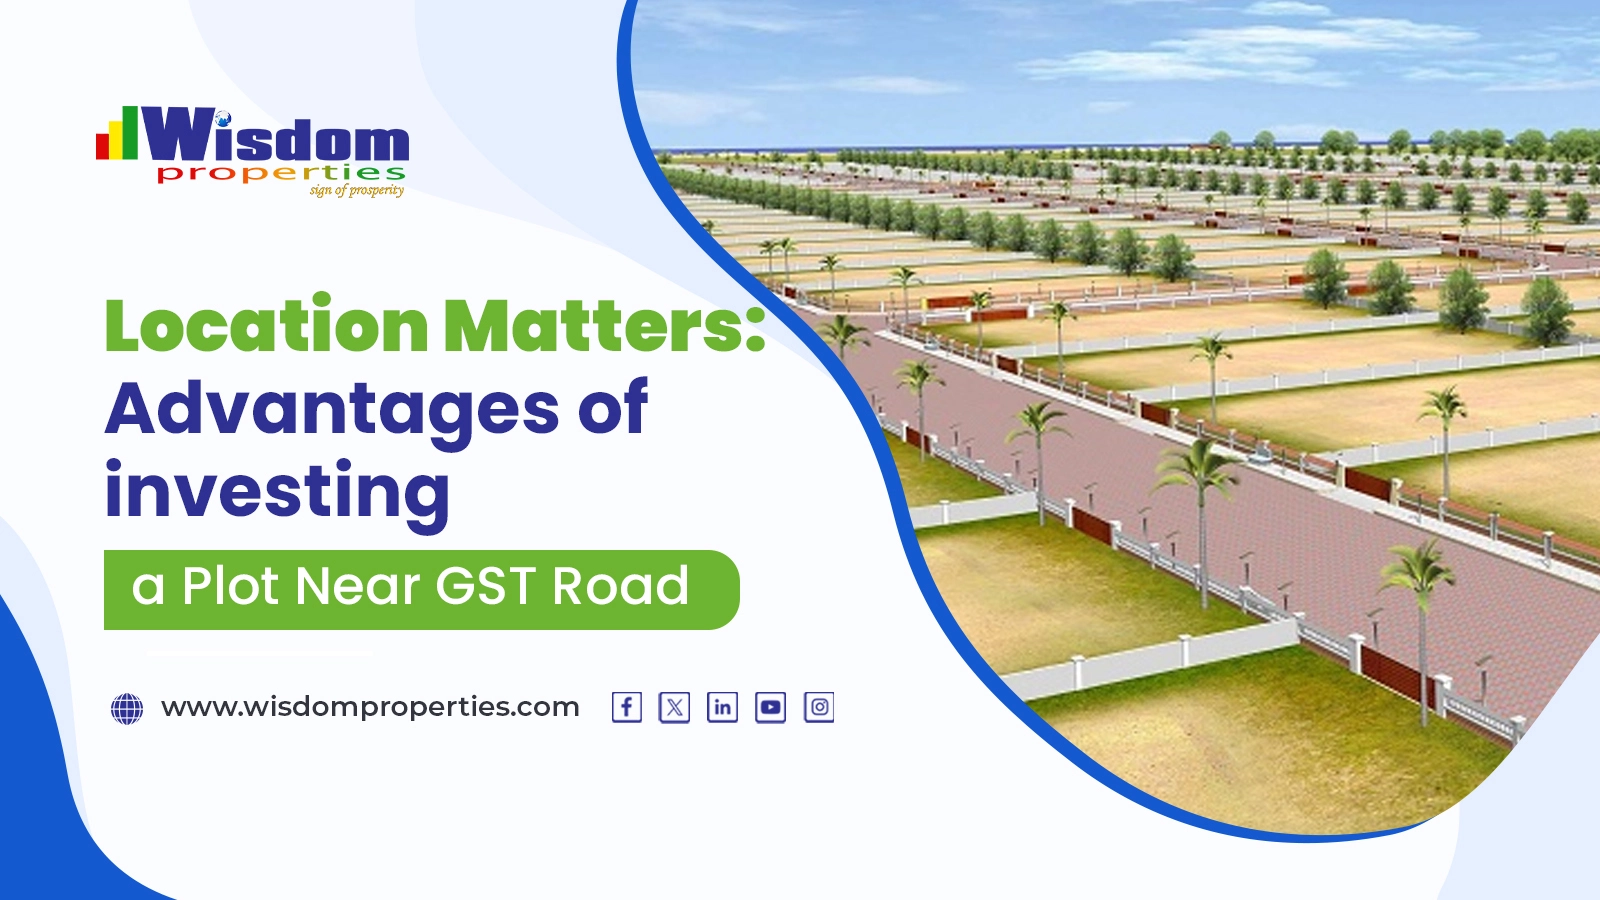 Location Matters: Advantages of investing a Plot Near GST Road